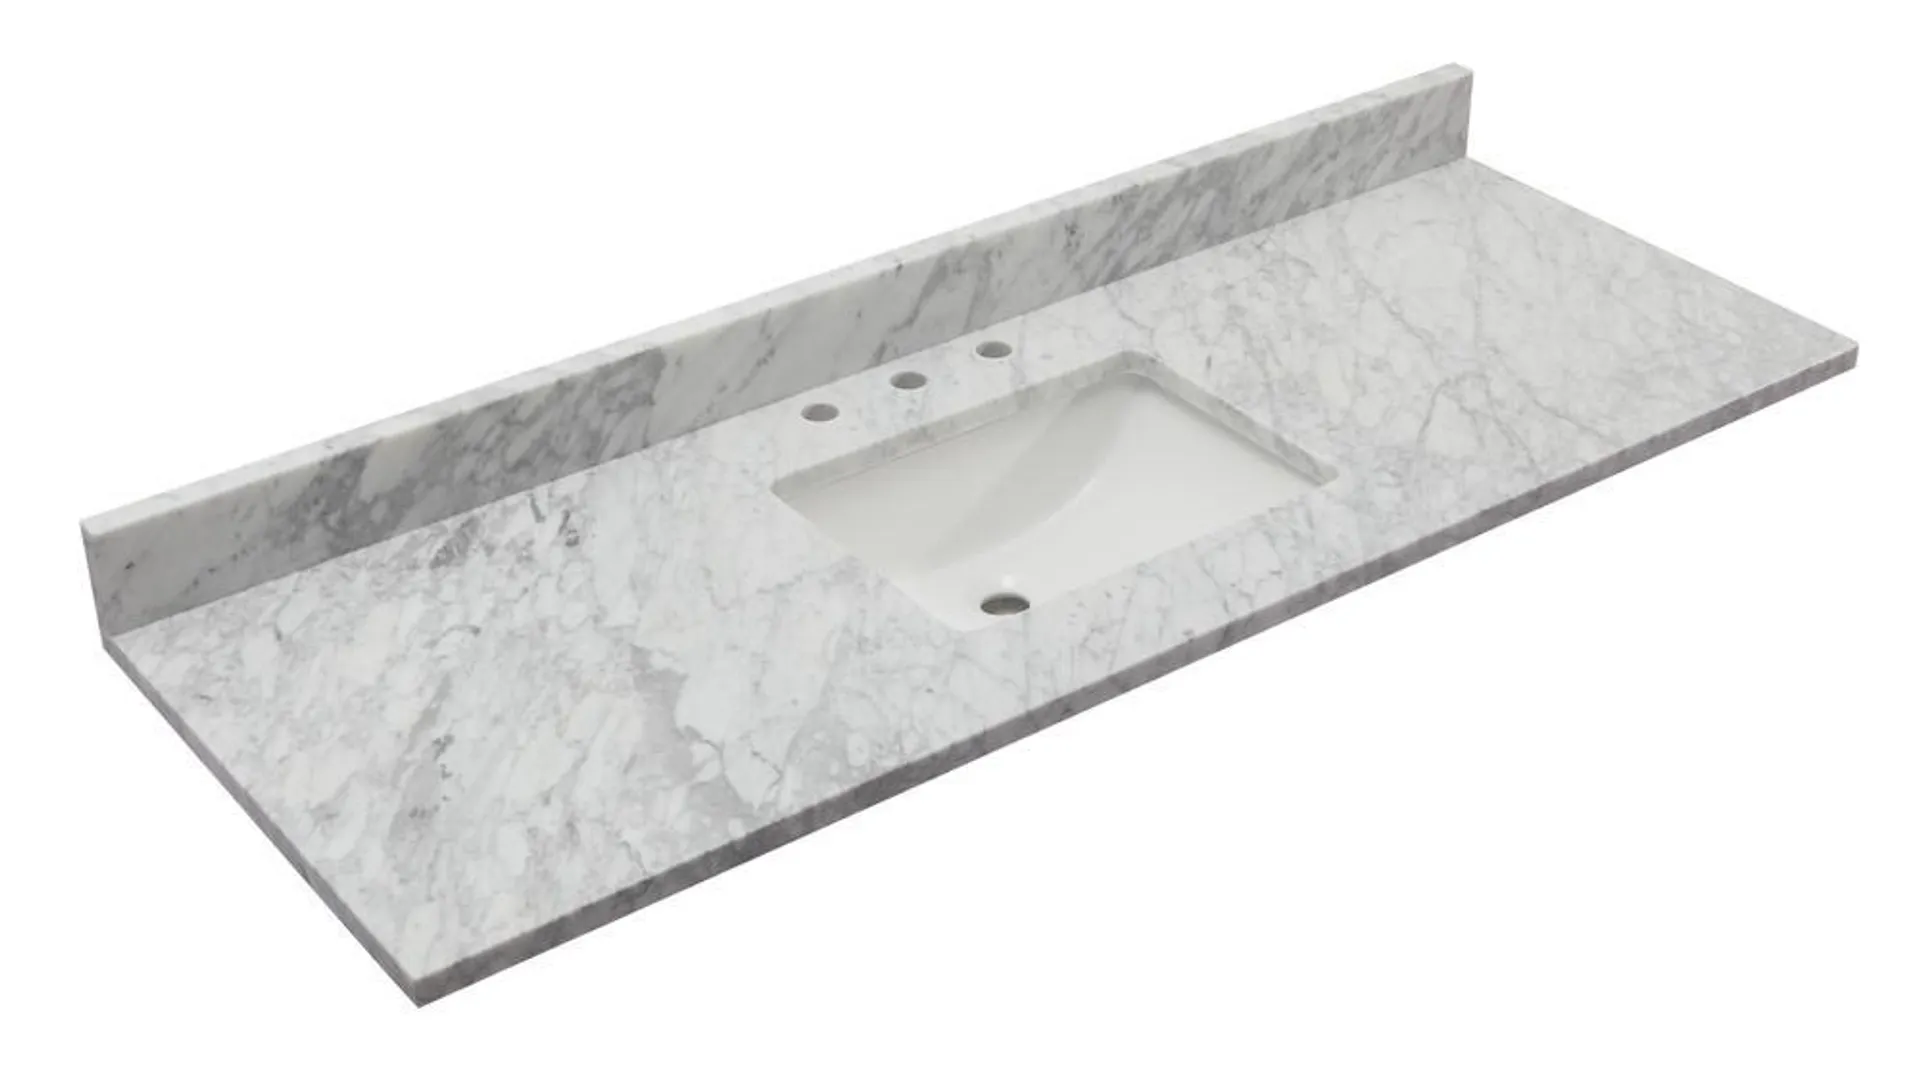 Tuscany® 61"W x 22"D Carrara Marble Vanity Top with Wave Rectangular Undermount Bowl